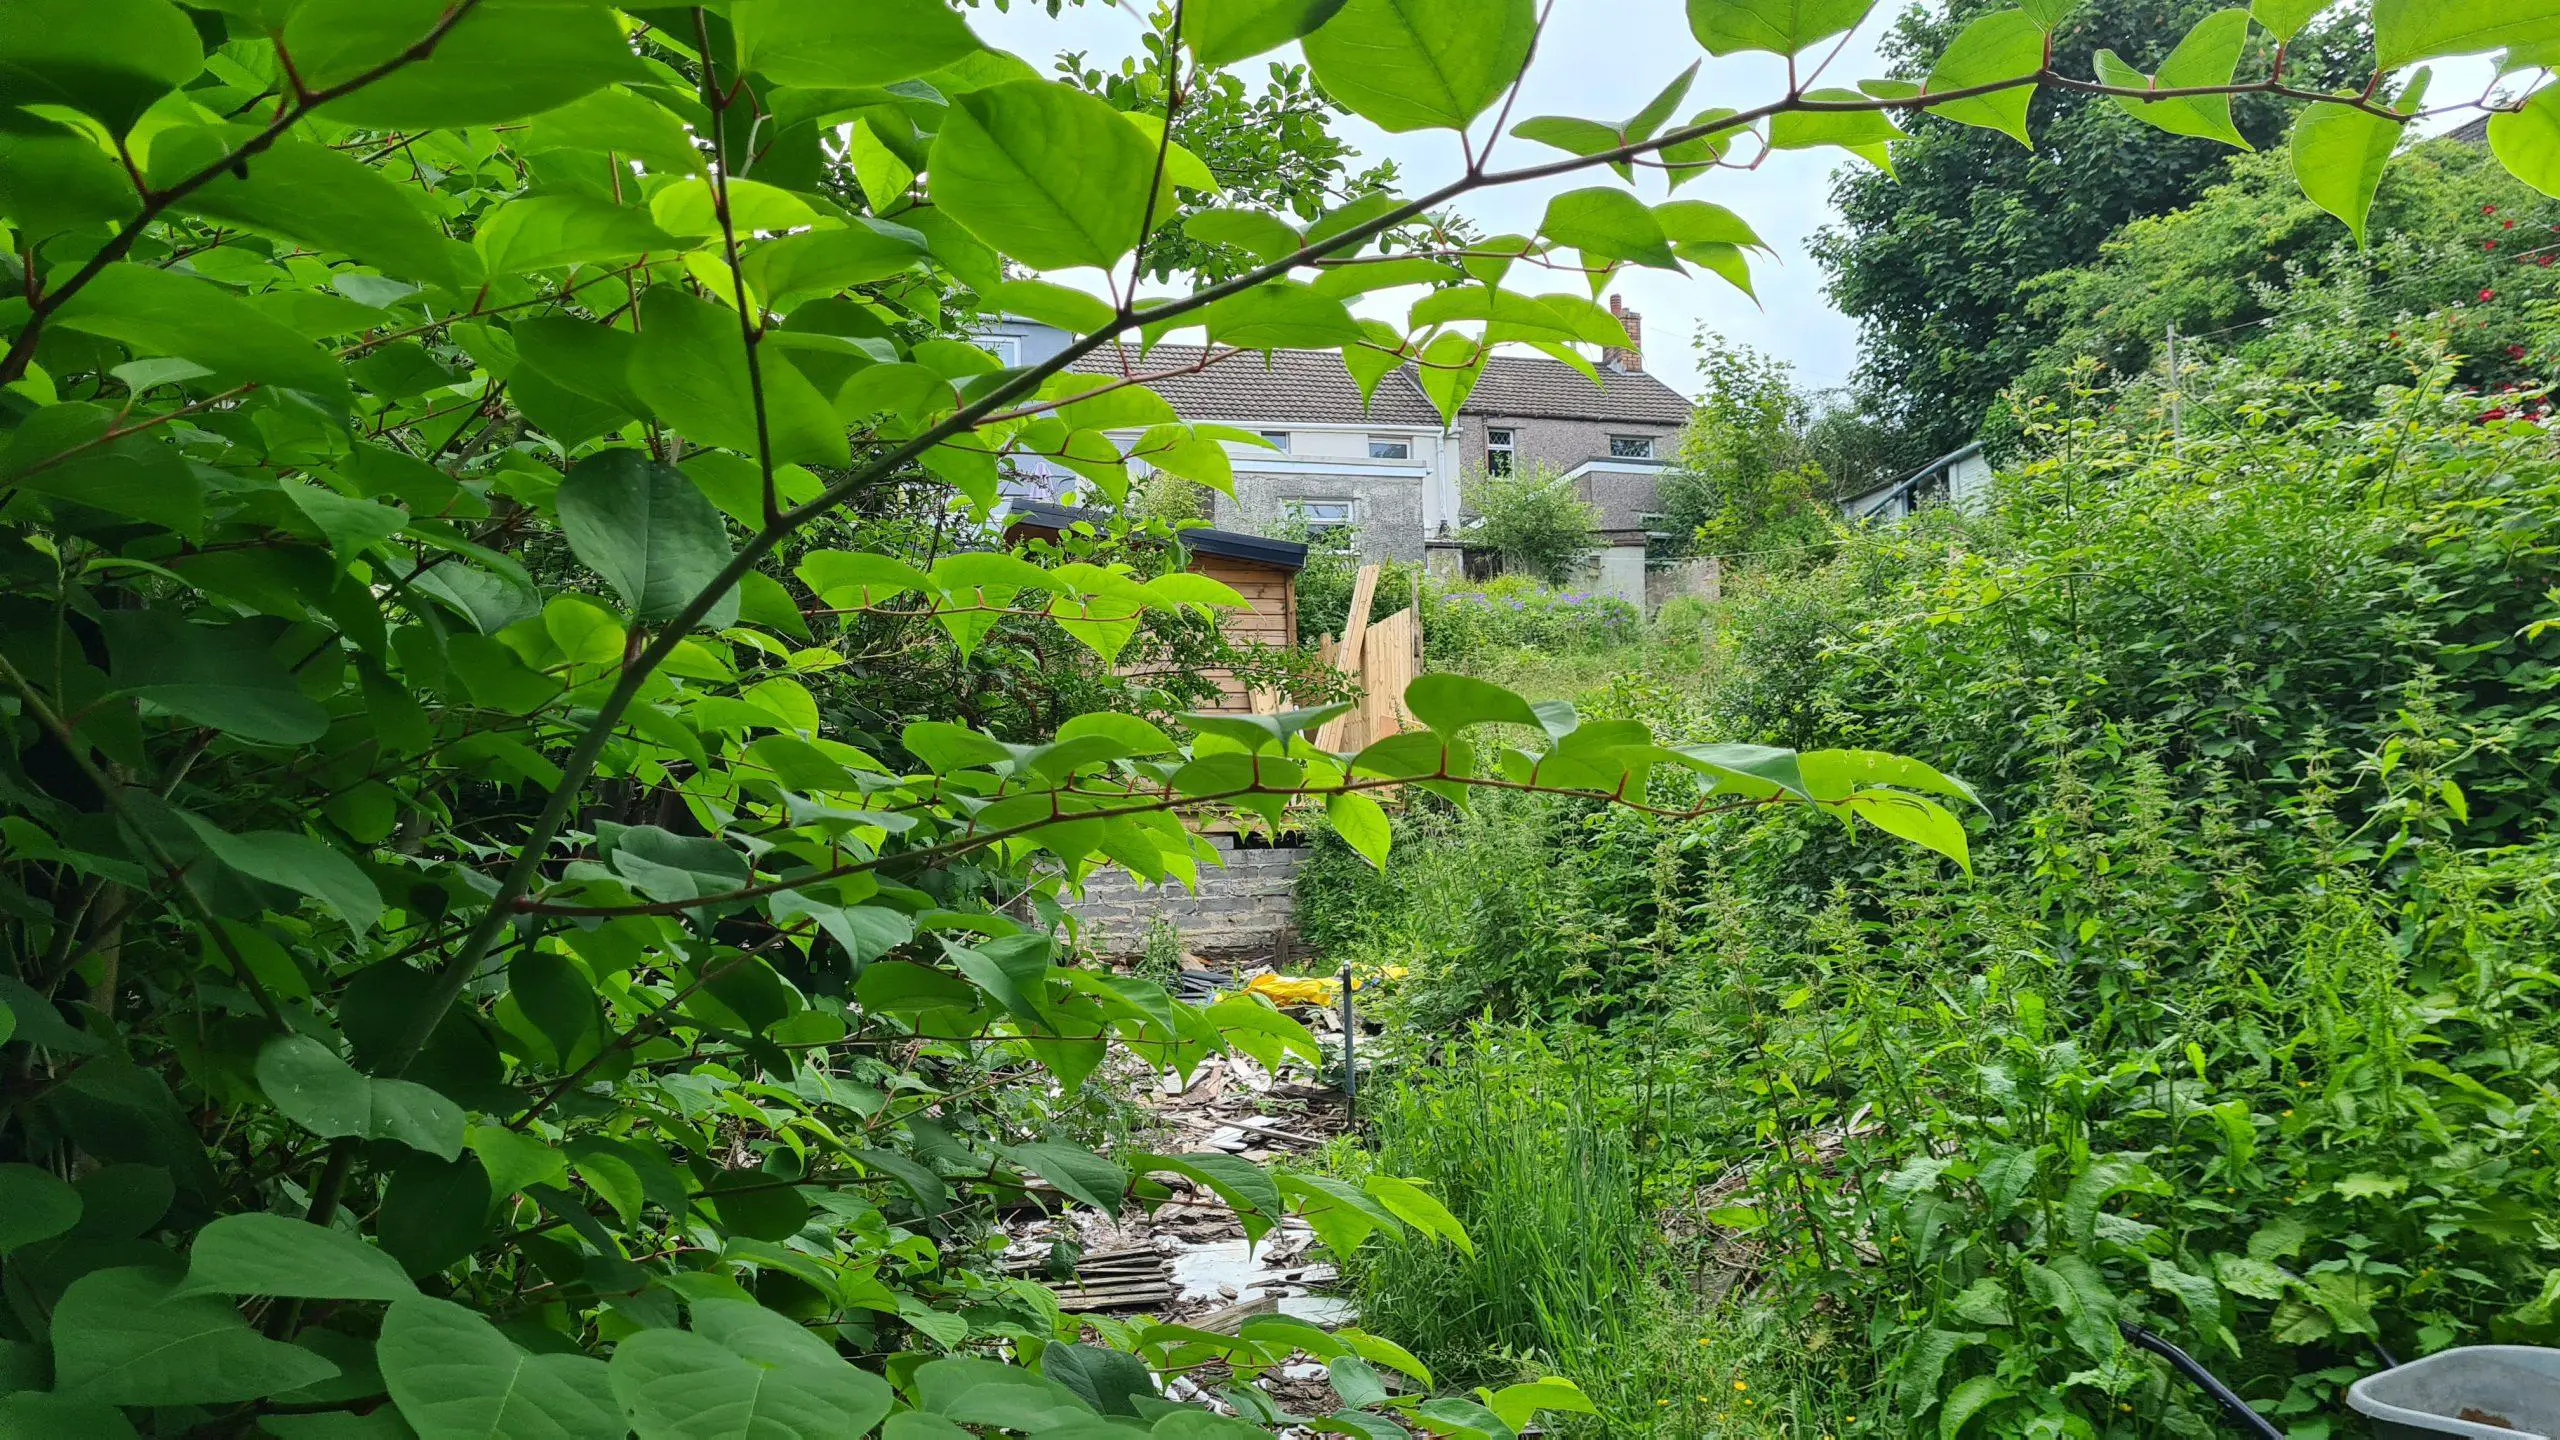 Diminished access to a property due to the overgrowth of Japanese knotweed